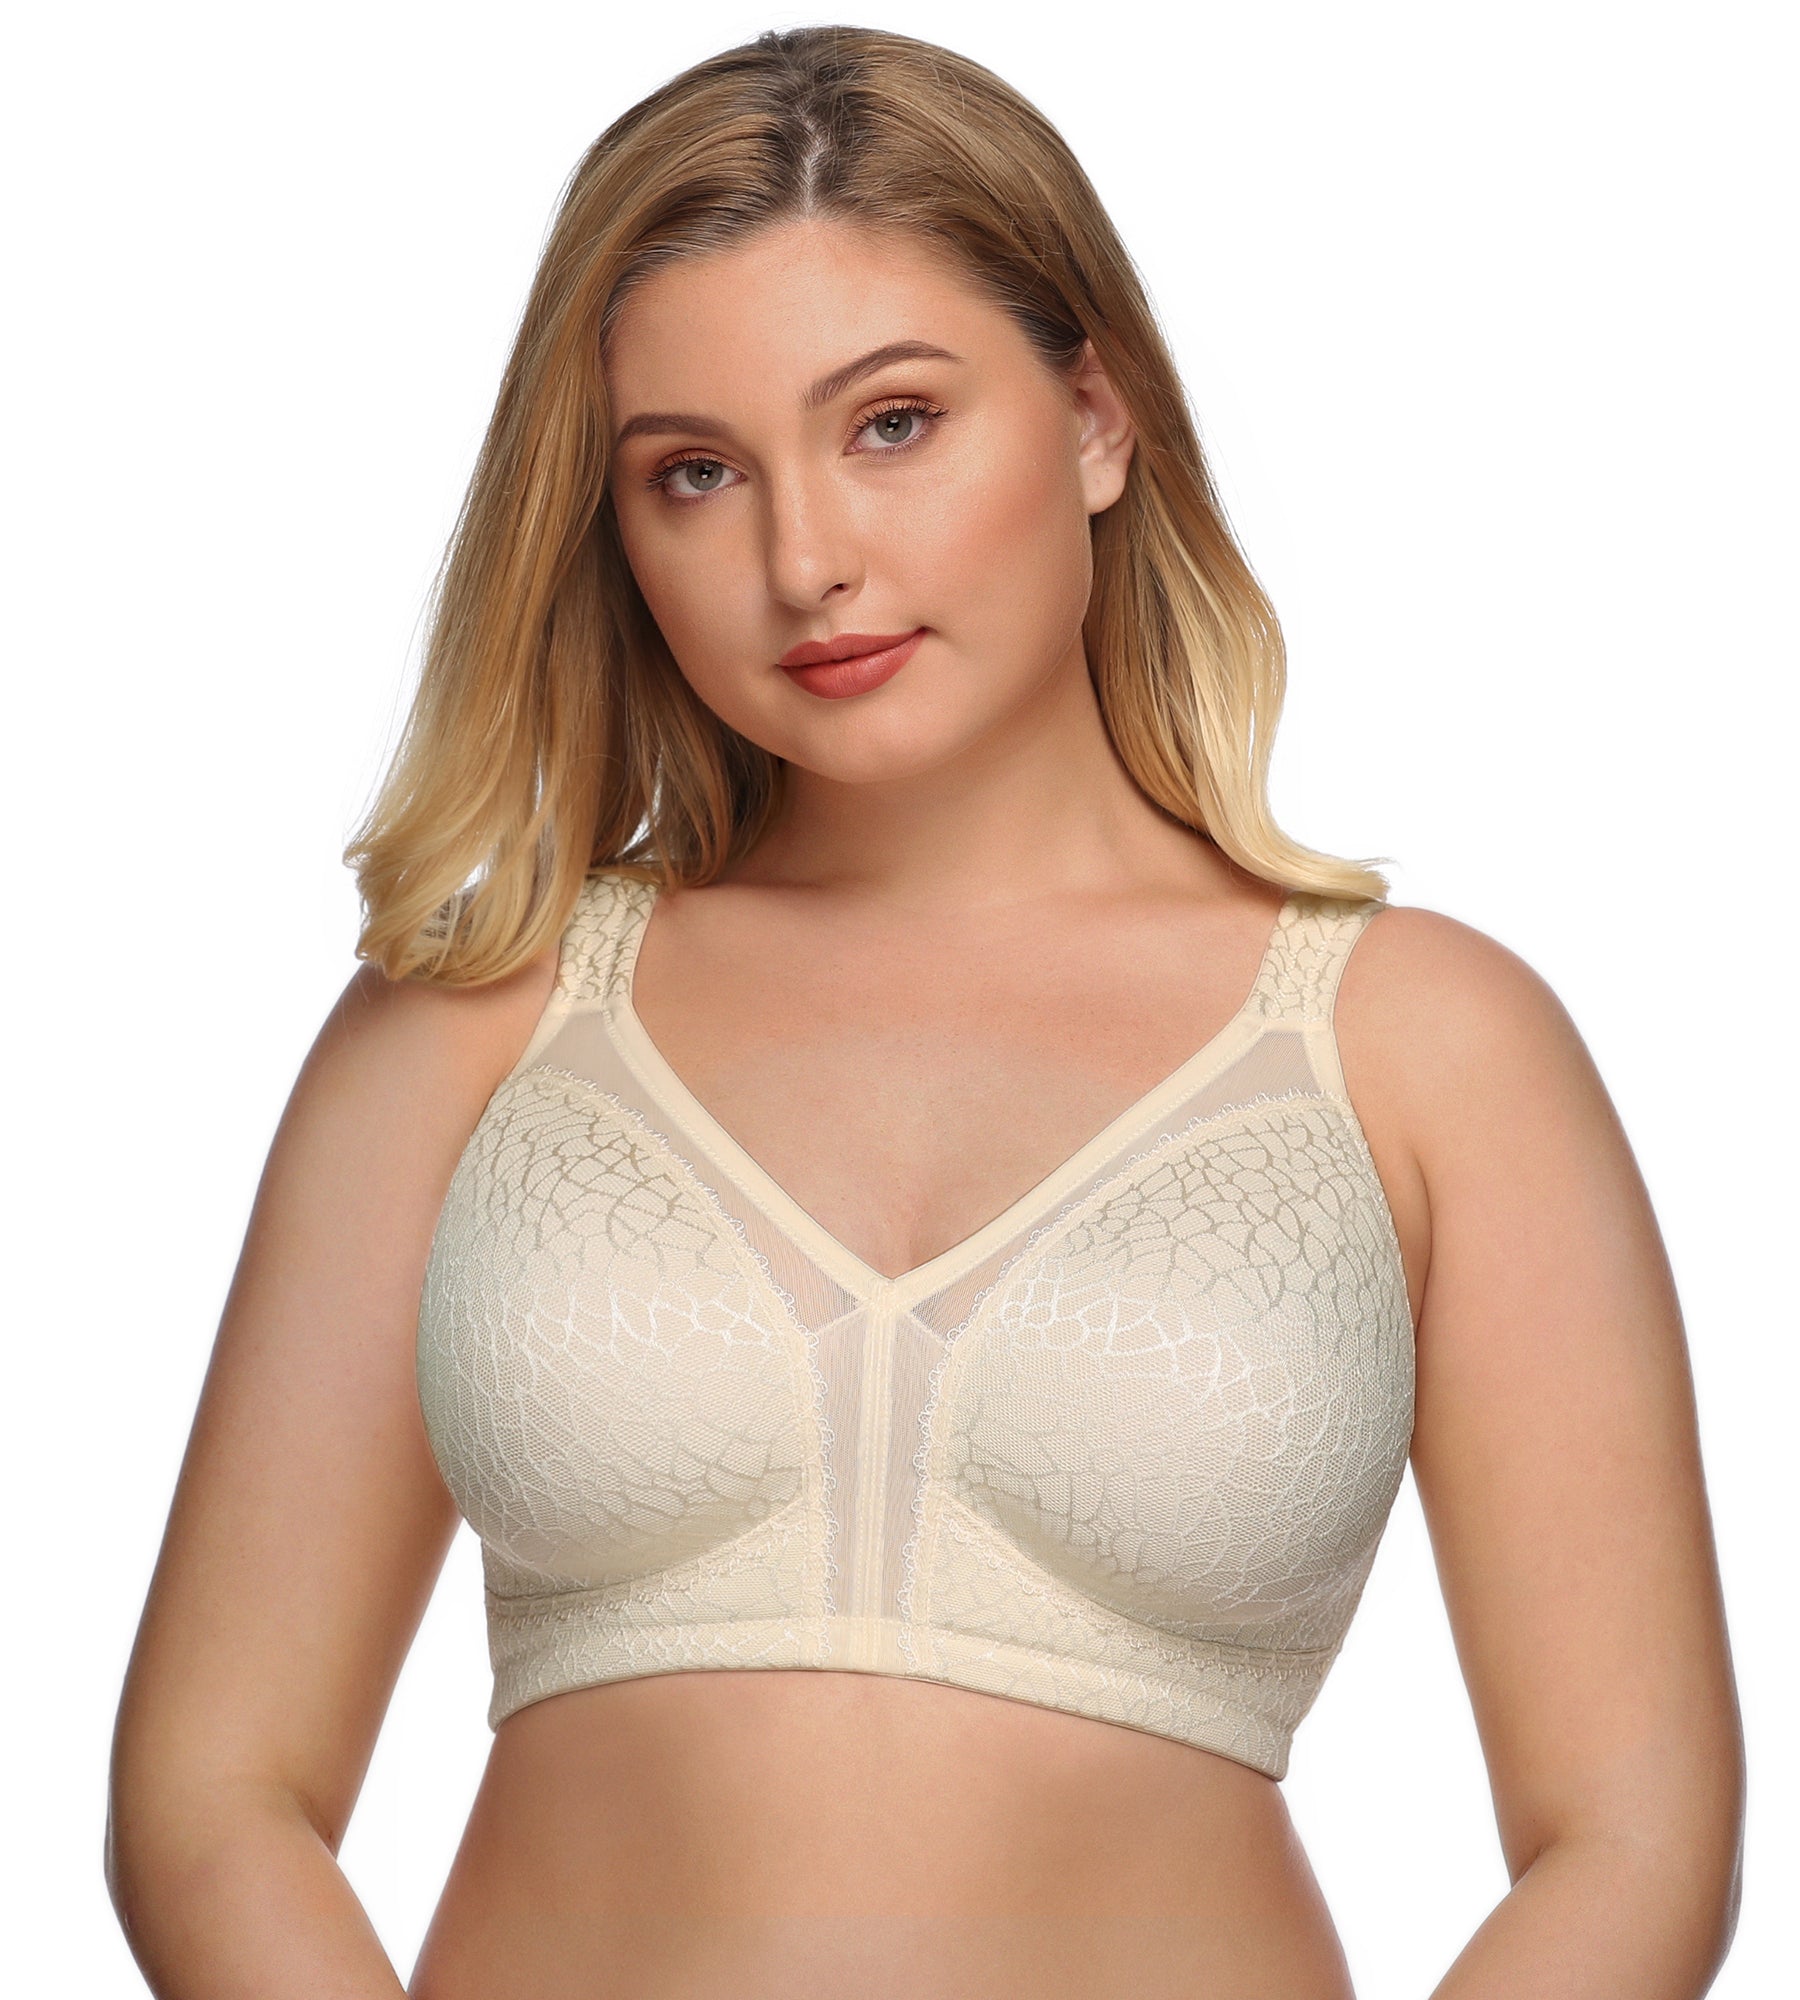 Playtex 18 Hour Lace-Cup Wire-Free Bra, Size C38 - 42DDD